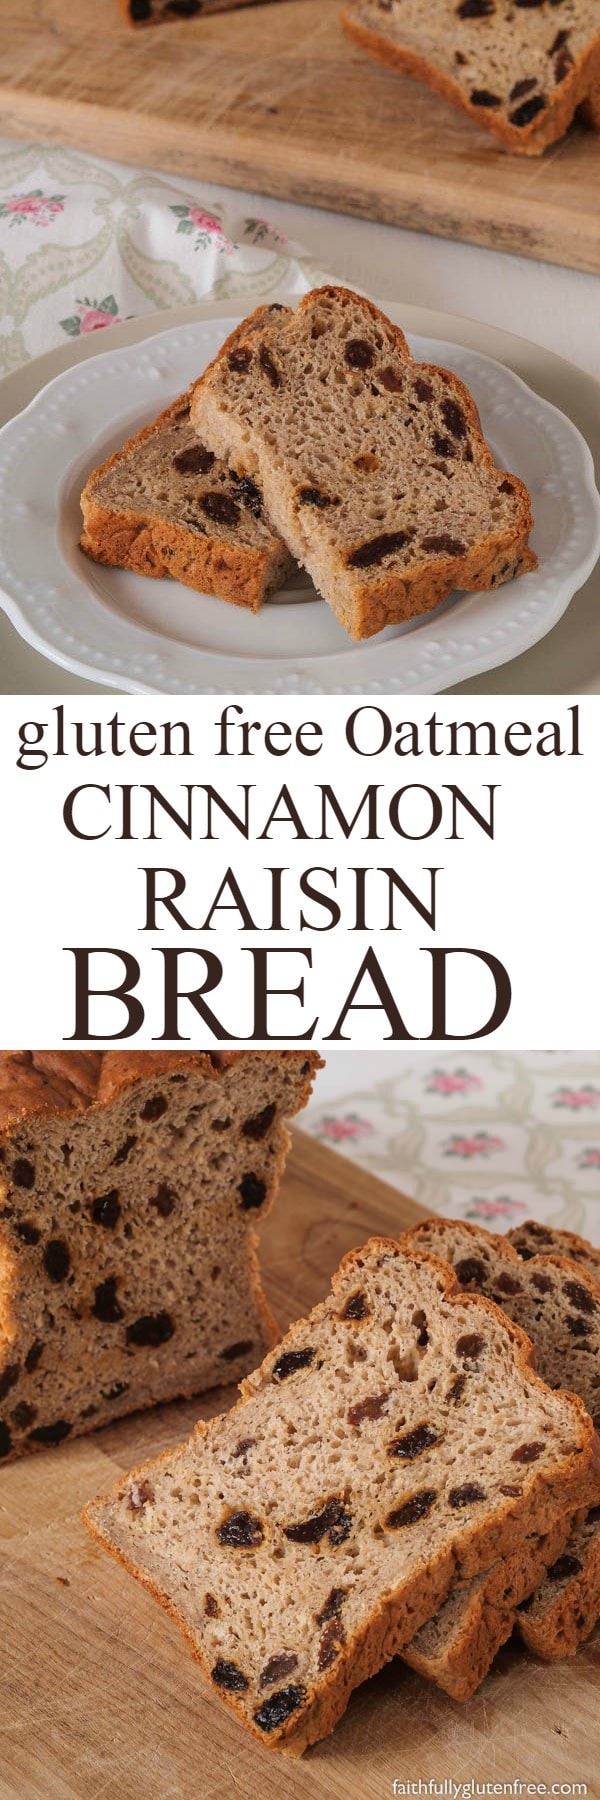 I wish you could smell the aroma of this gluten free Oatmeal Cinnamon Raisin Bread baking. I love this fresh bread - with cinnamon, oats, and studded with plump raisins - smothered with butter and sprinkled with cinnamon and sugar. Yum!